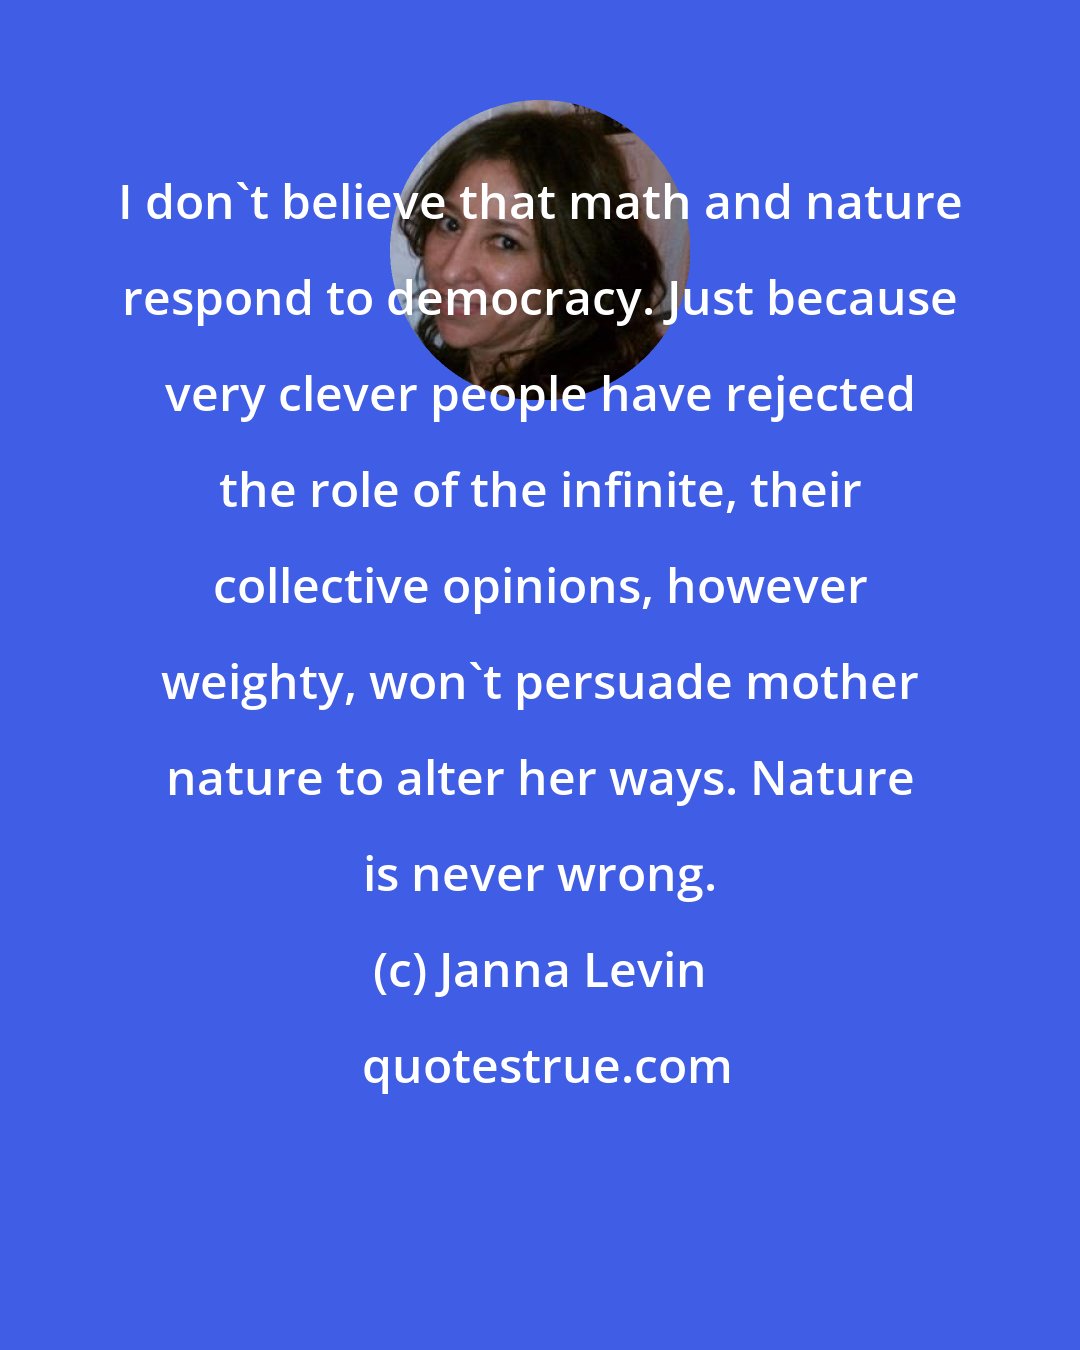 Janna Levin: I don't believe that math and nature respond to democracy. Just because very clever people have rejected the role of the infinite, their collective opinions, however weighty, won't persuade mother nature to alter her ways. Nature is never wrong.